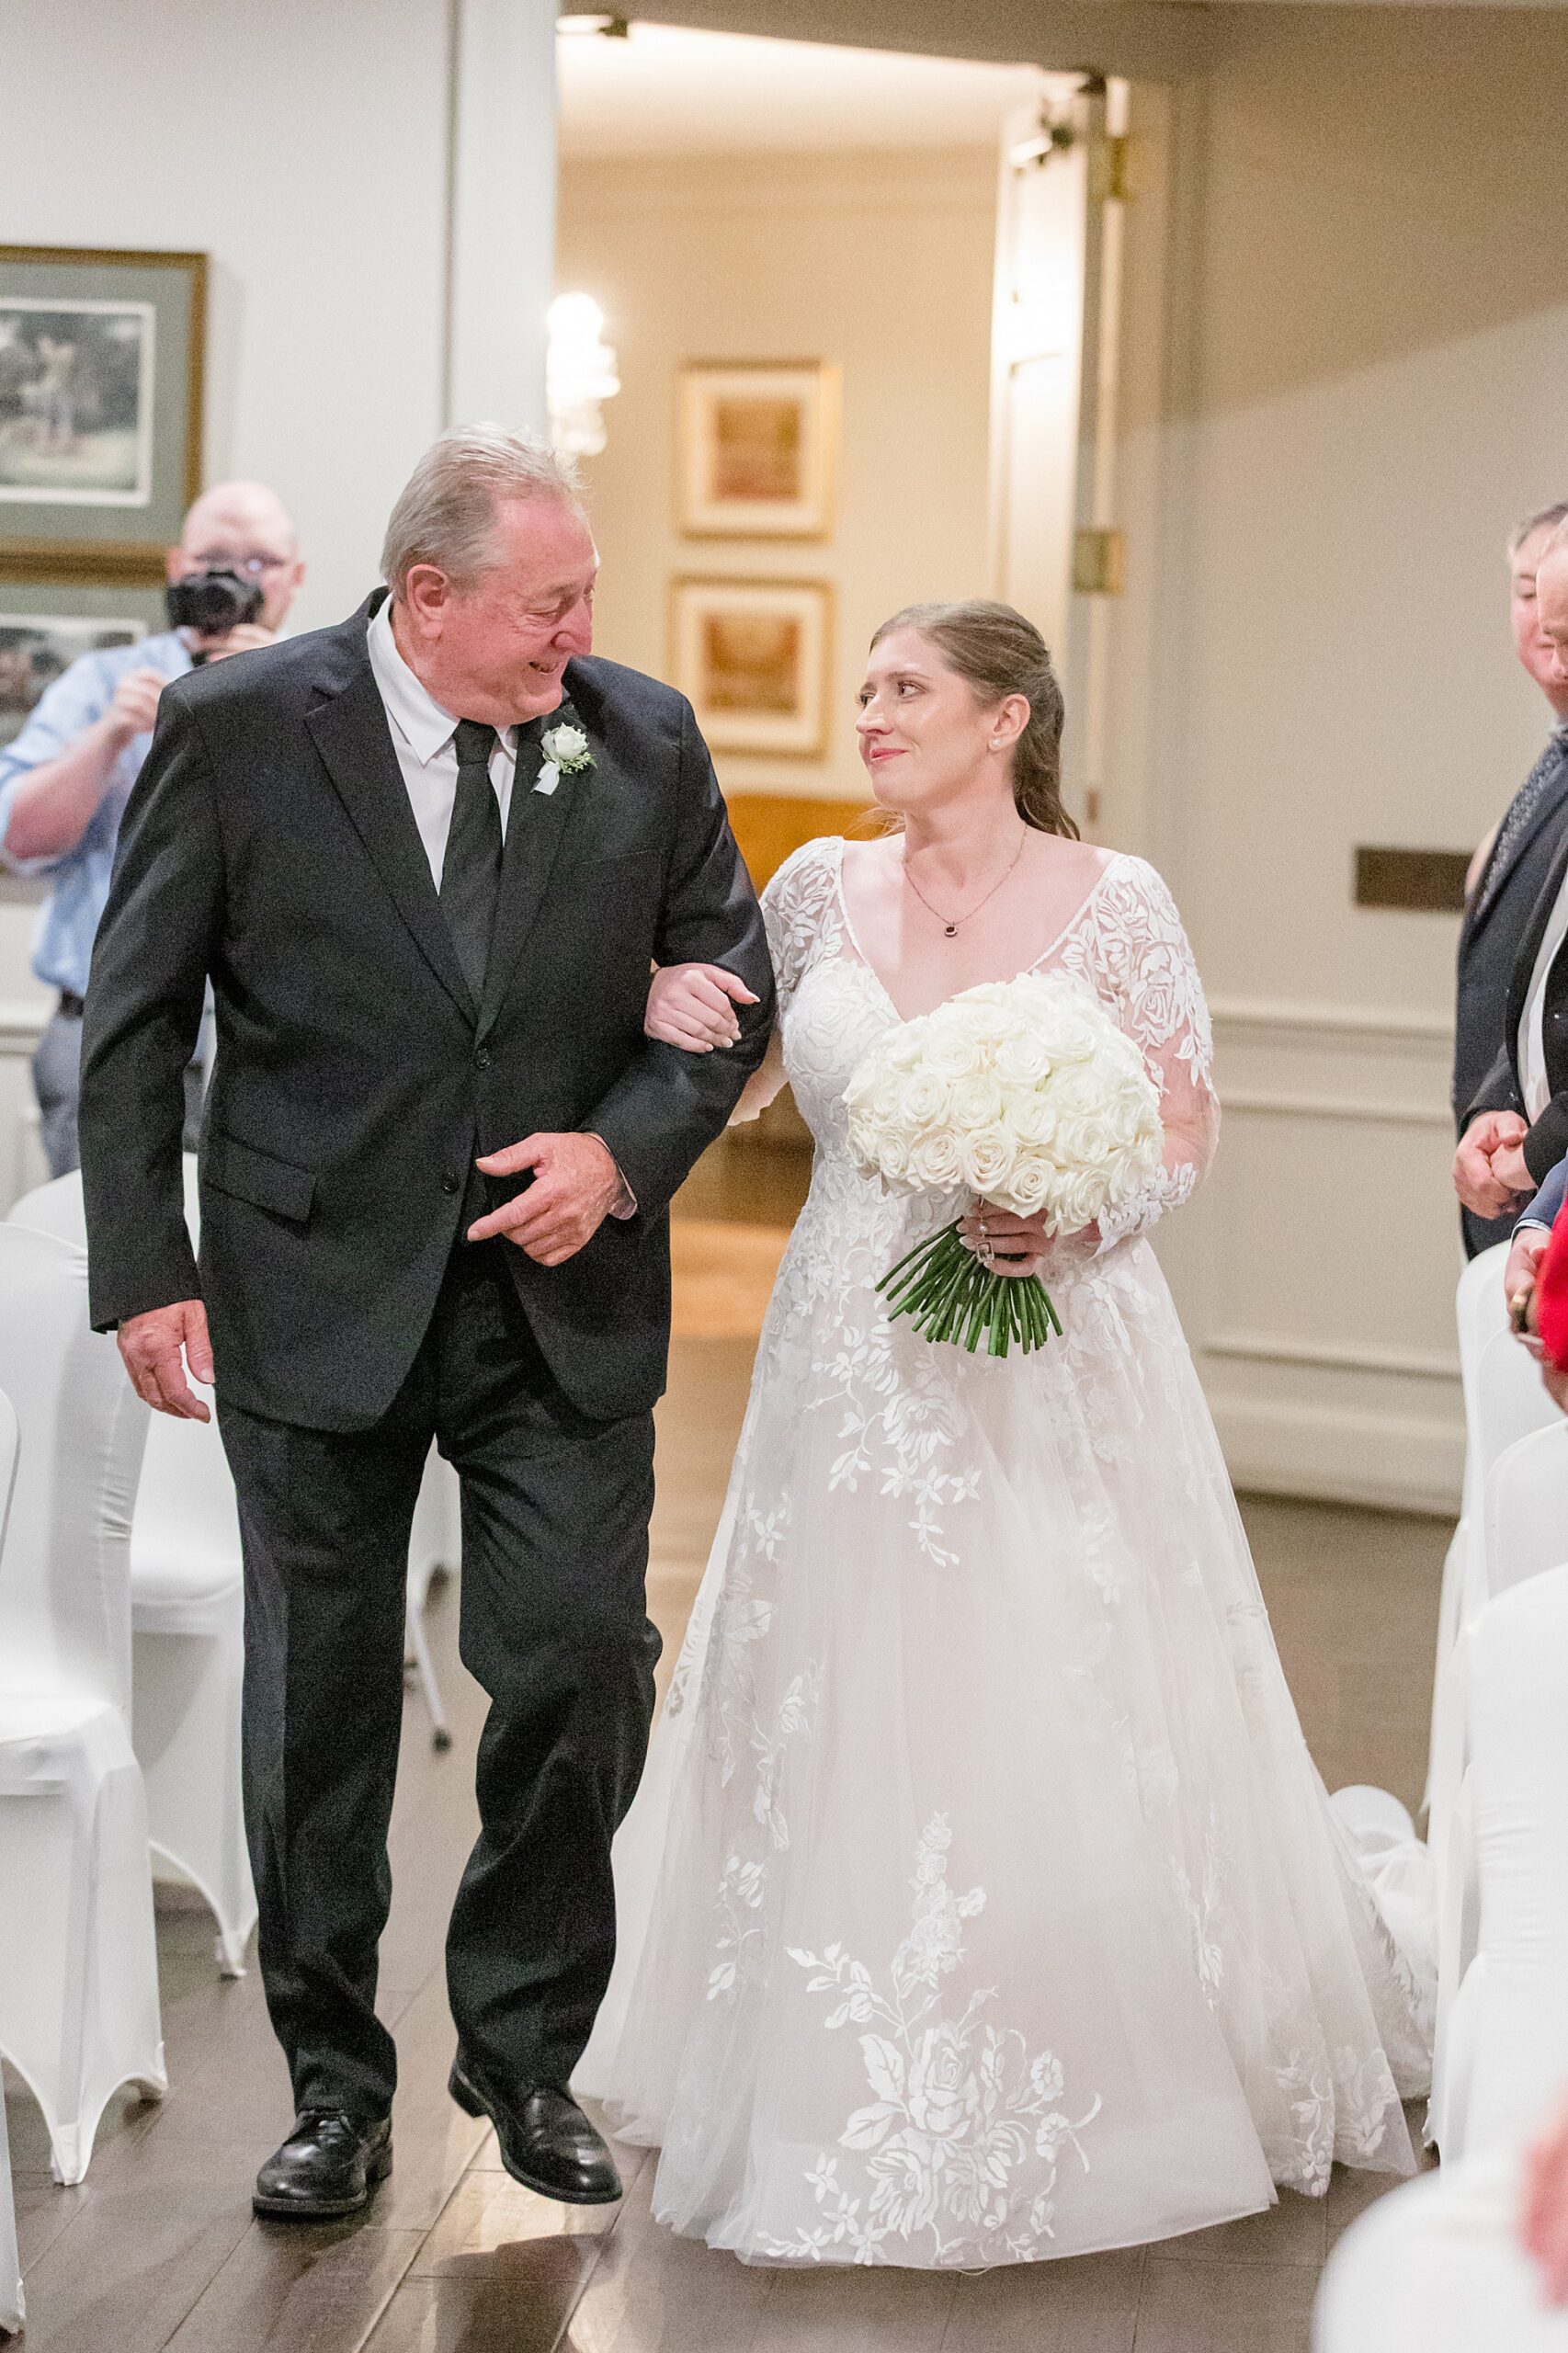 father of the bride and bride share a moment as they walk down the aisle together